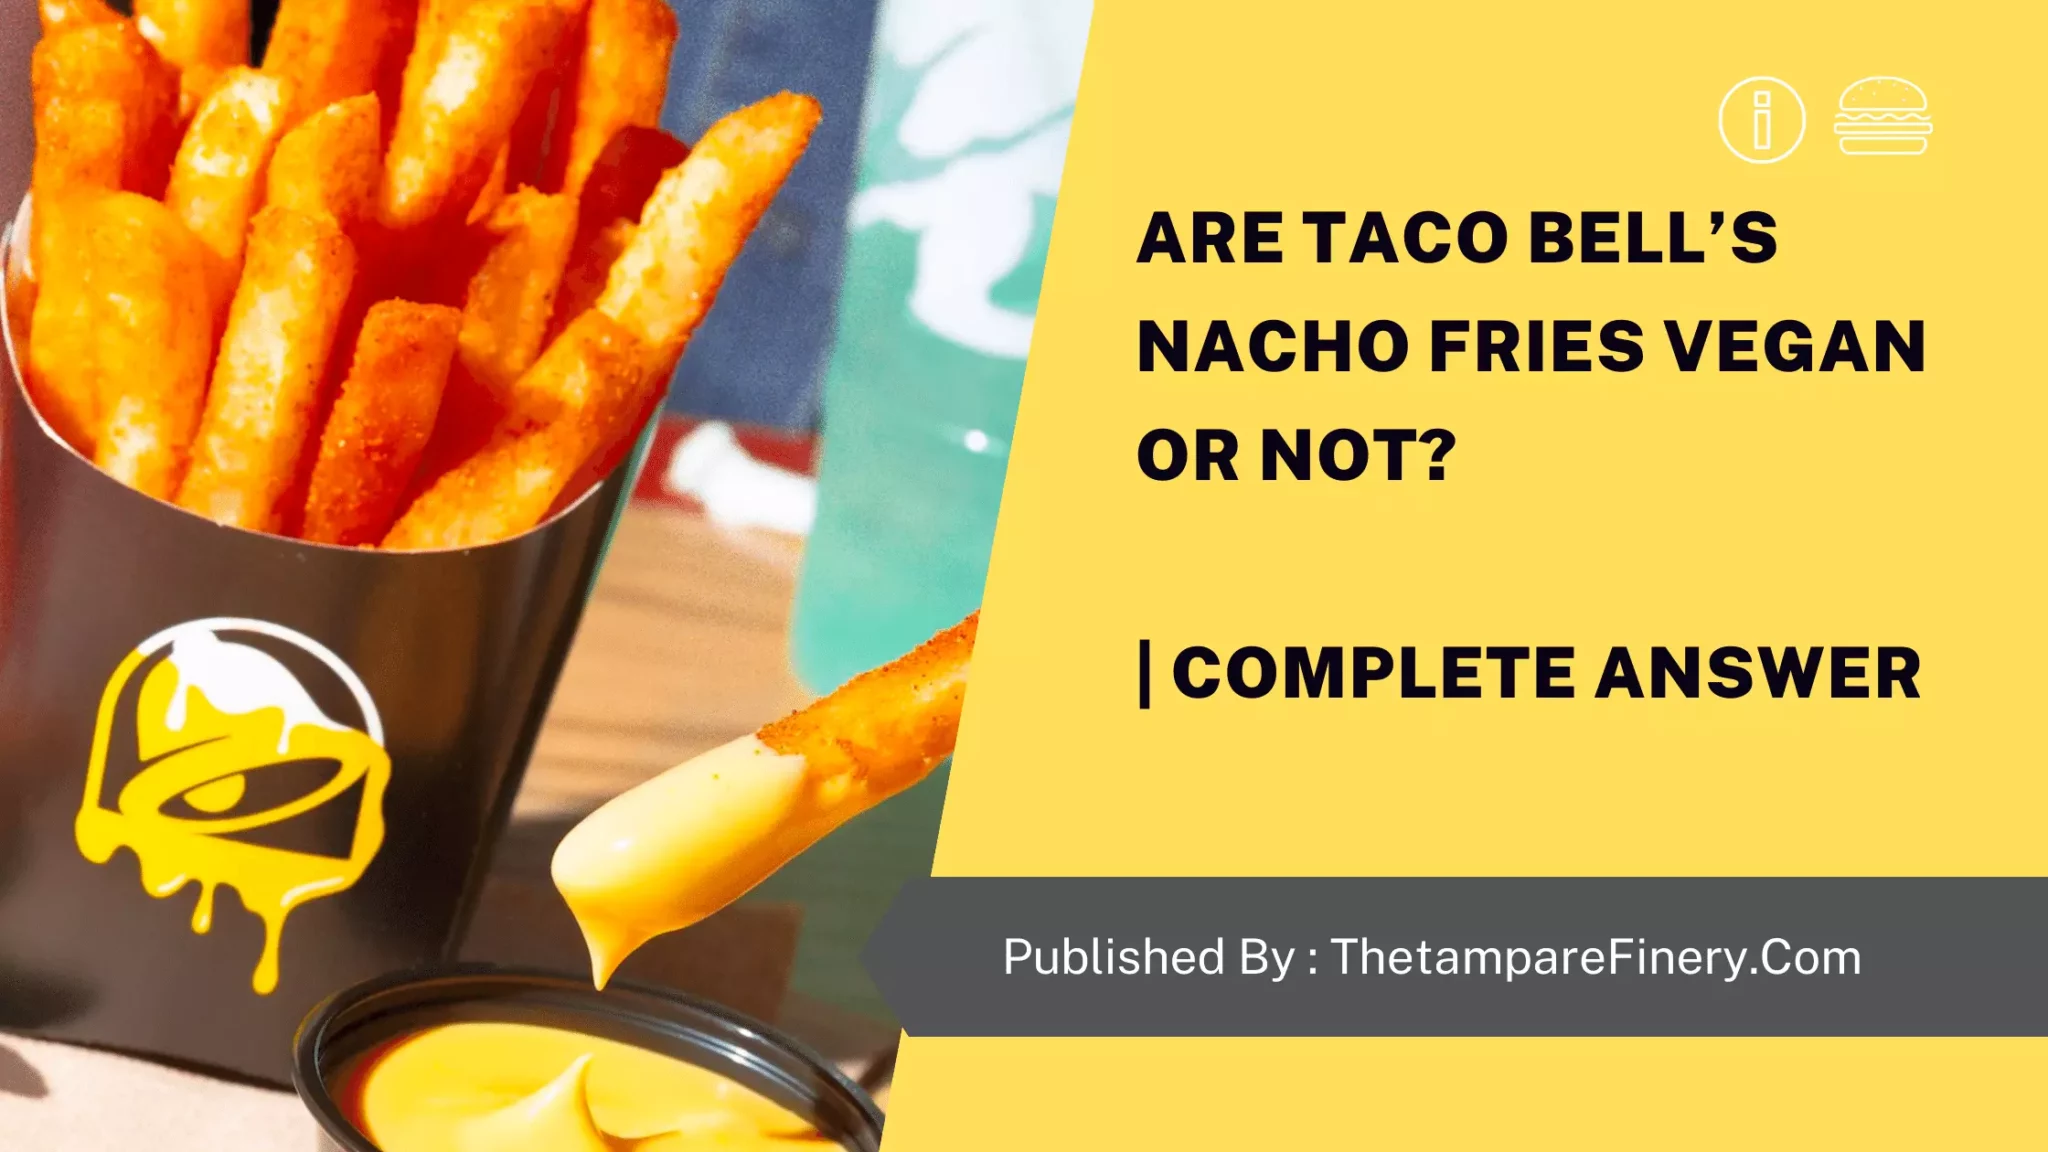 Are Taco Bells Nacho Fries Vegan or Not